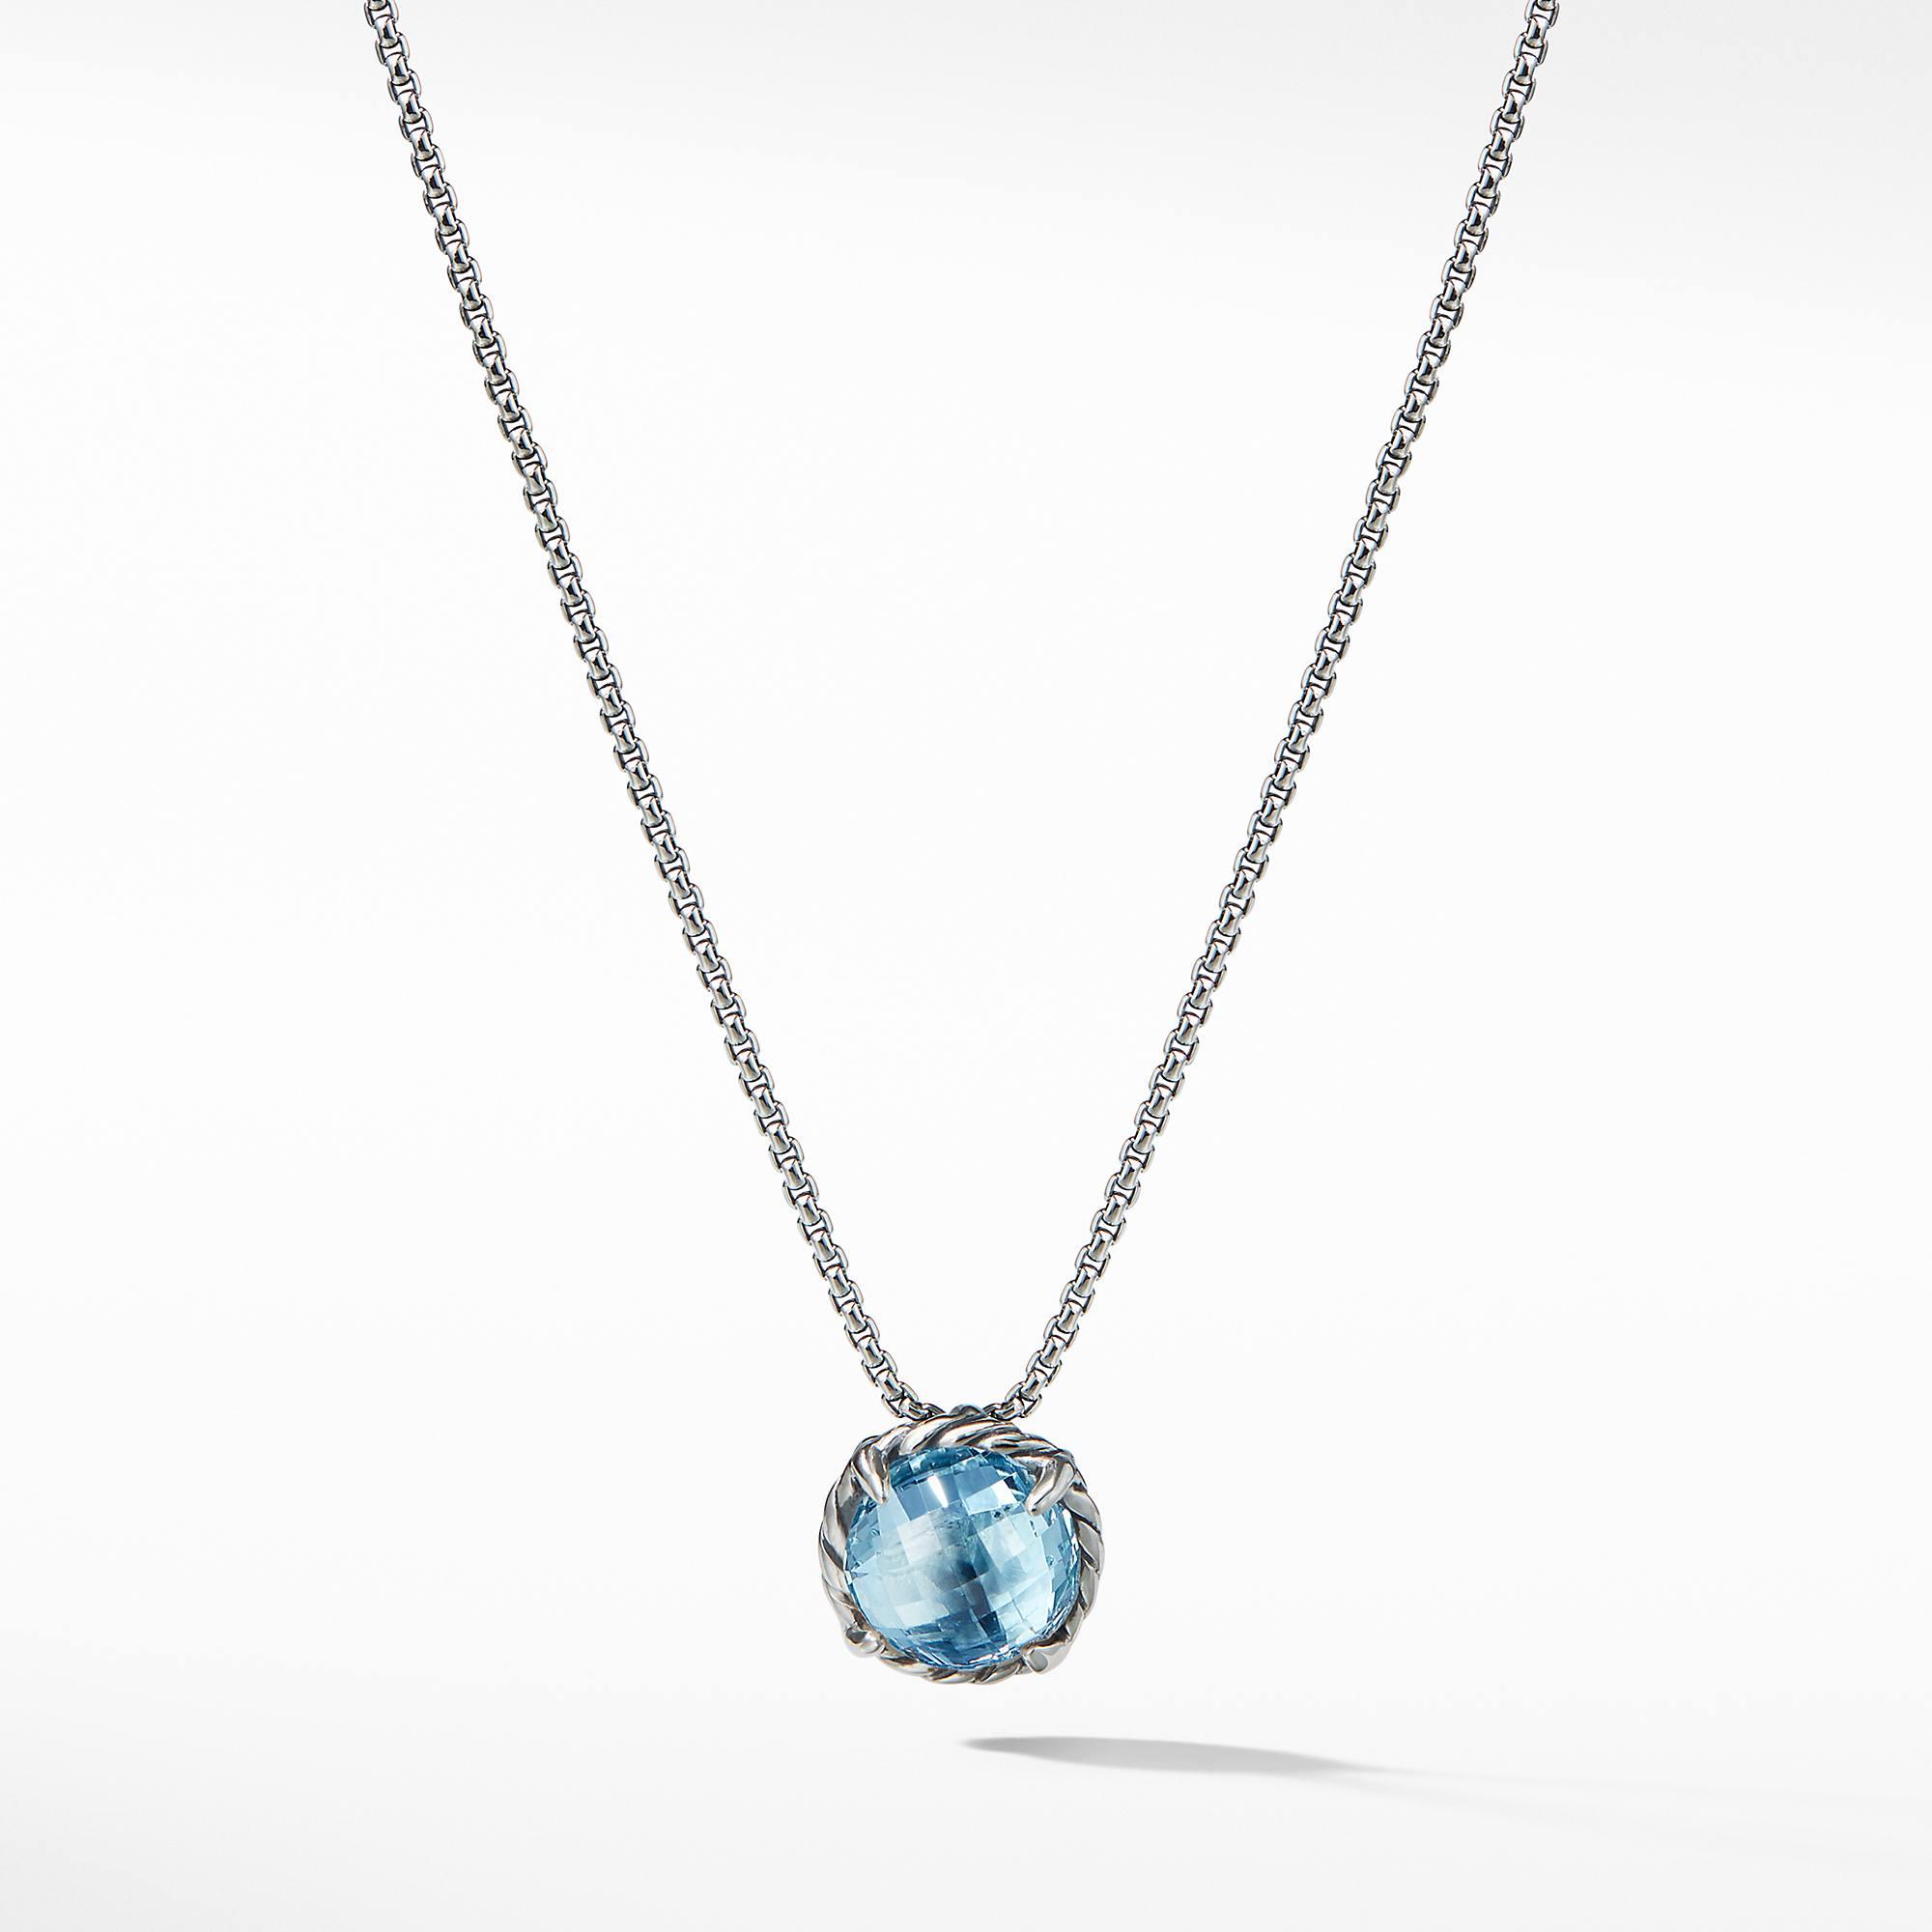 David Yurman Petite Chatelaine Necklace in Sterling Silver with Blue Topaz